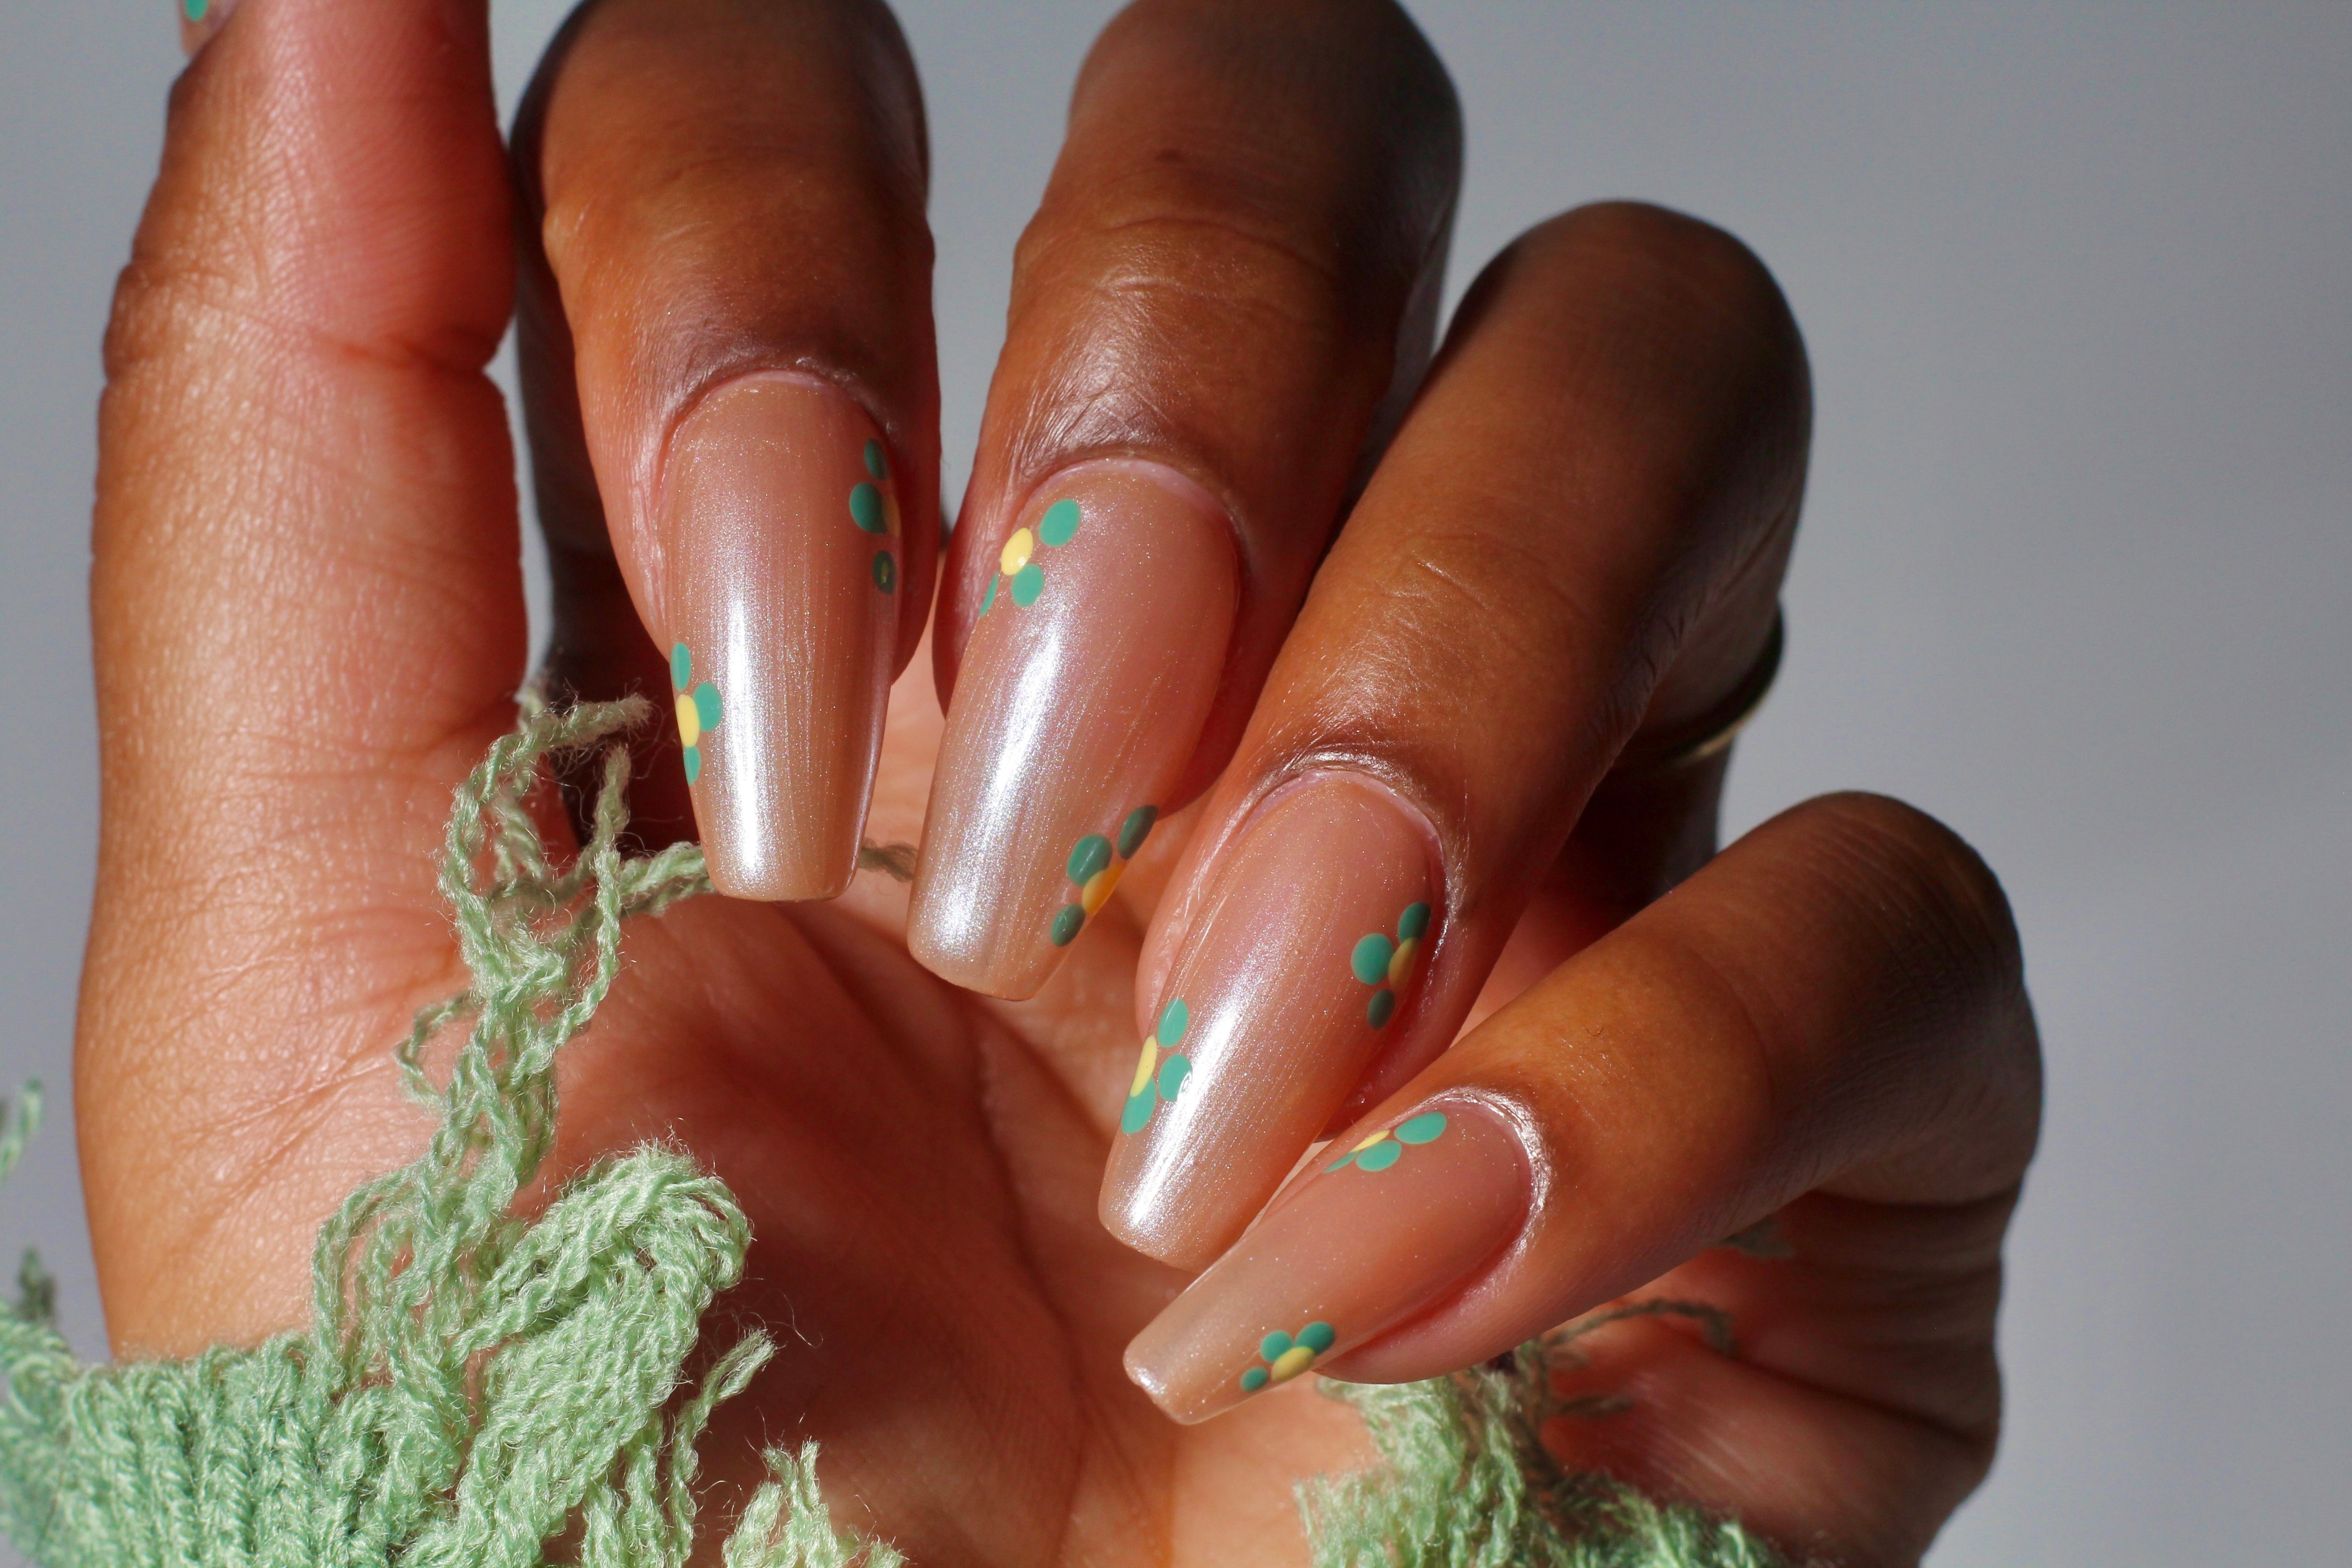 Get the Floral Nail Art Trend with Pear Nova's Spring Nail Shades + a Dotting Tool!